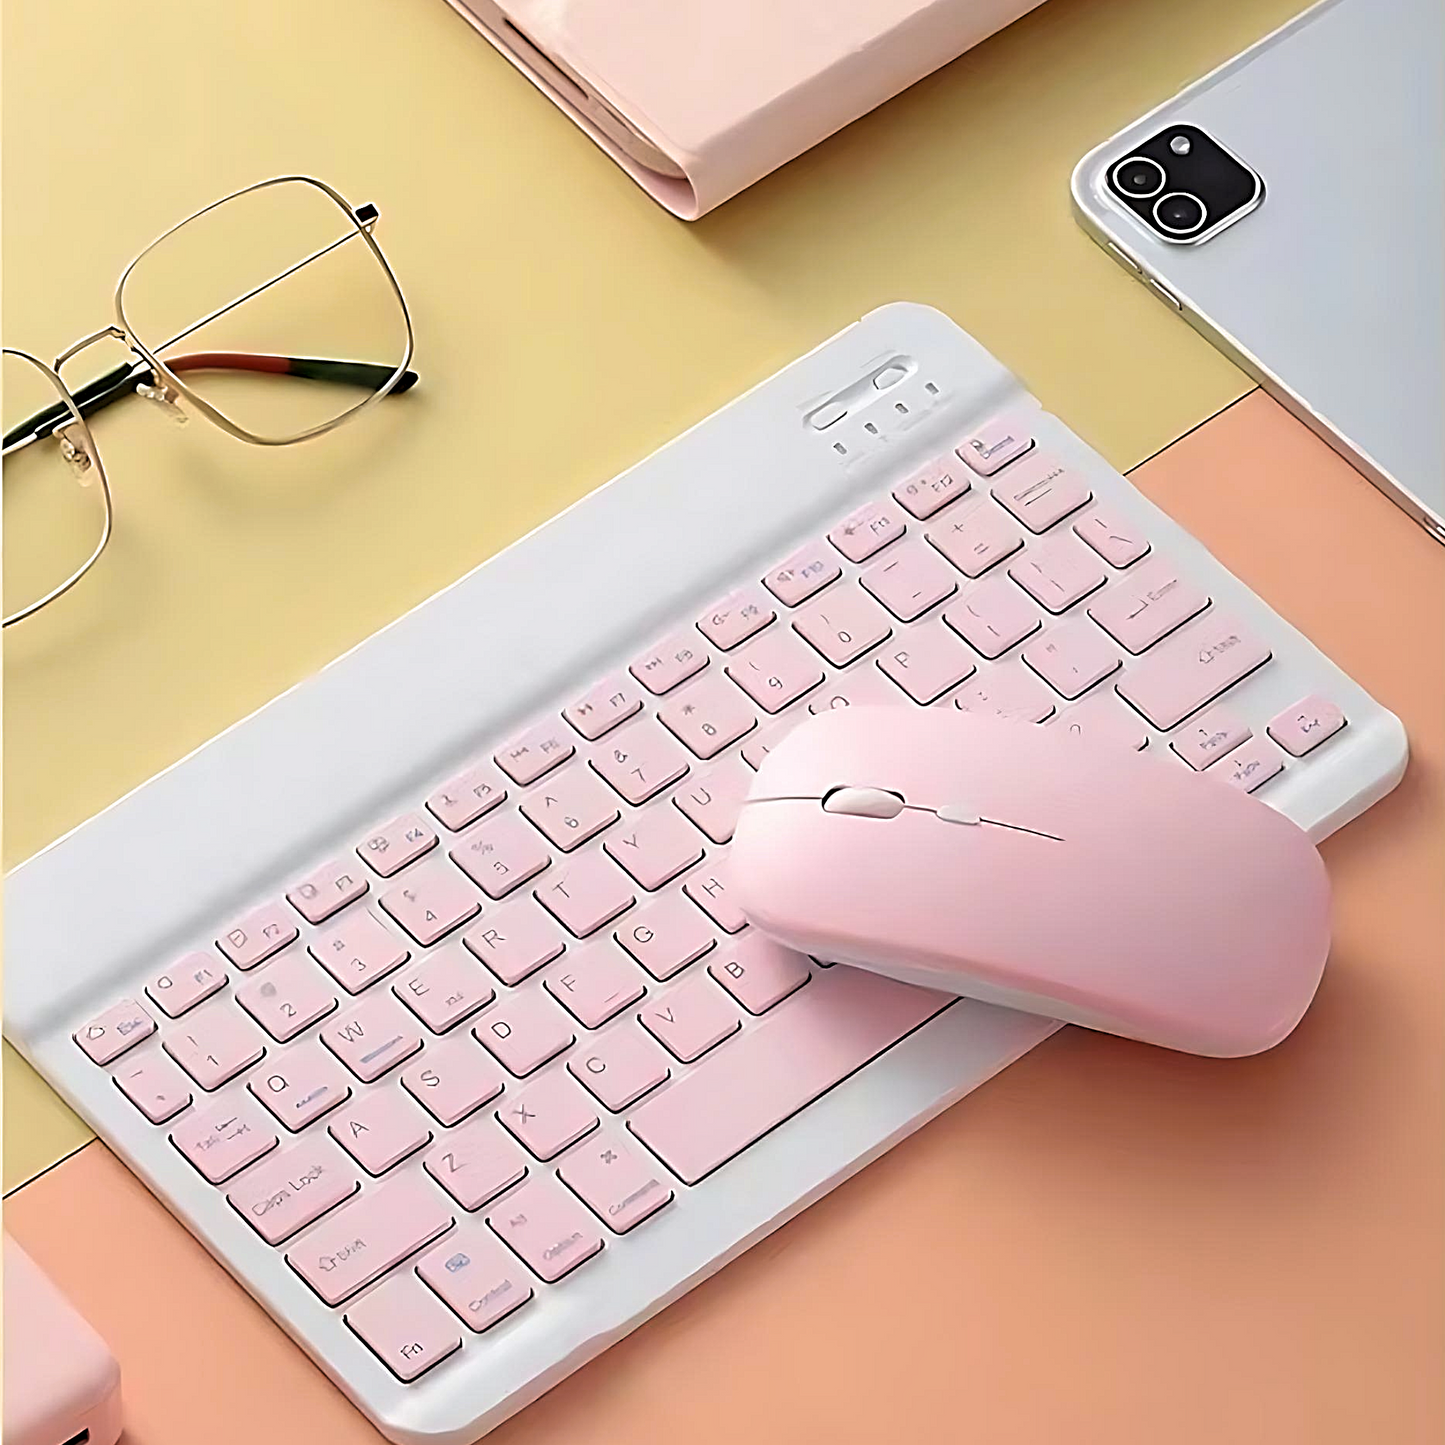 a pastel wireless keyboard and mouse set on a yellow and orange background